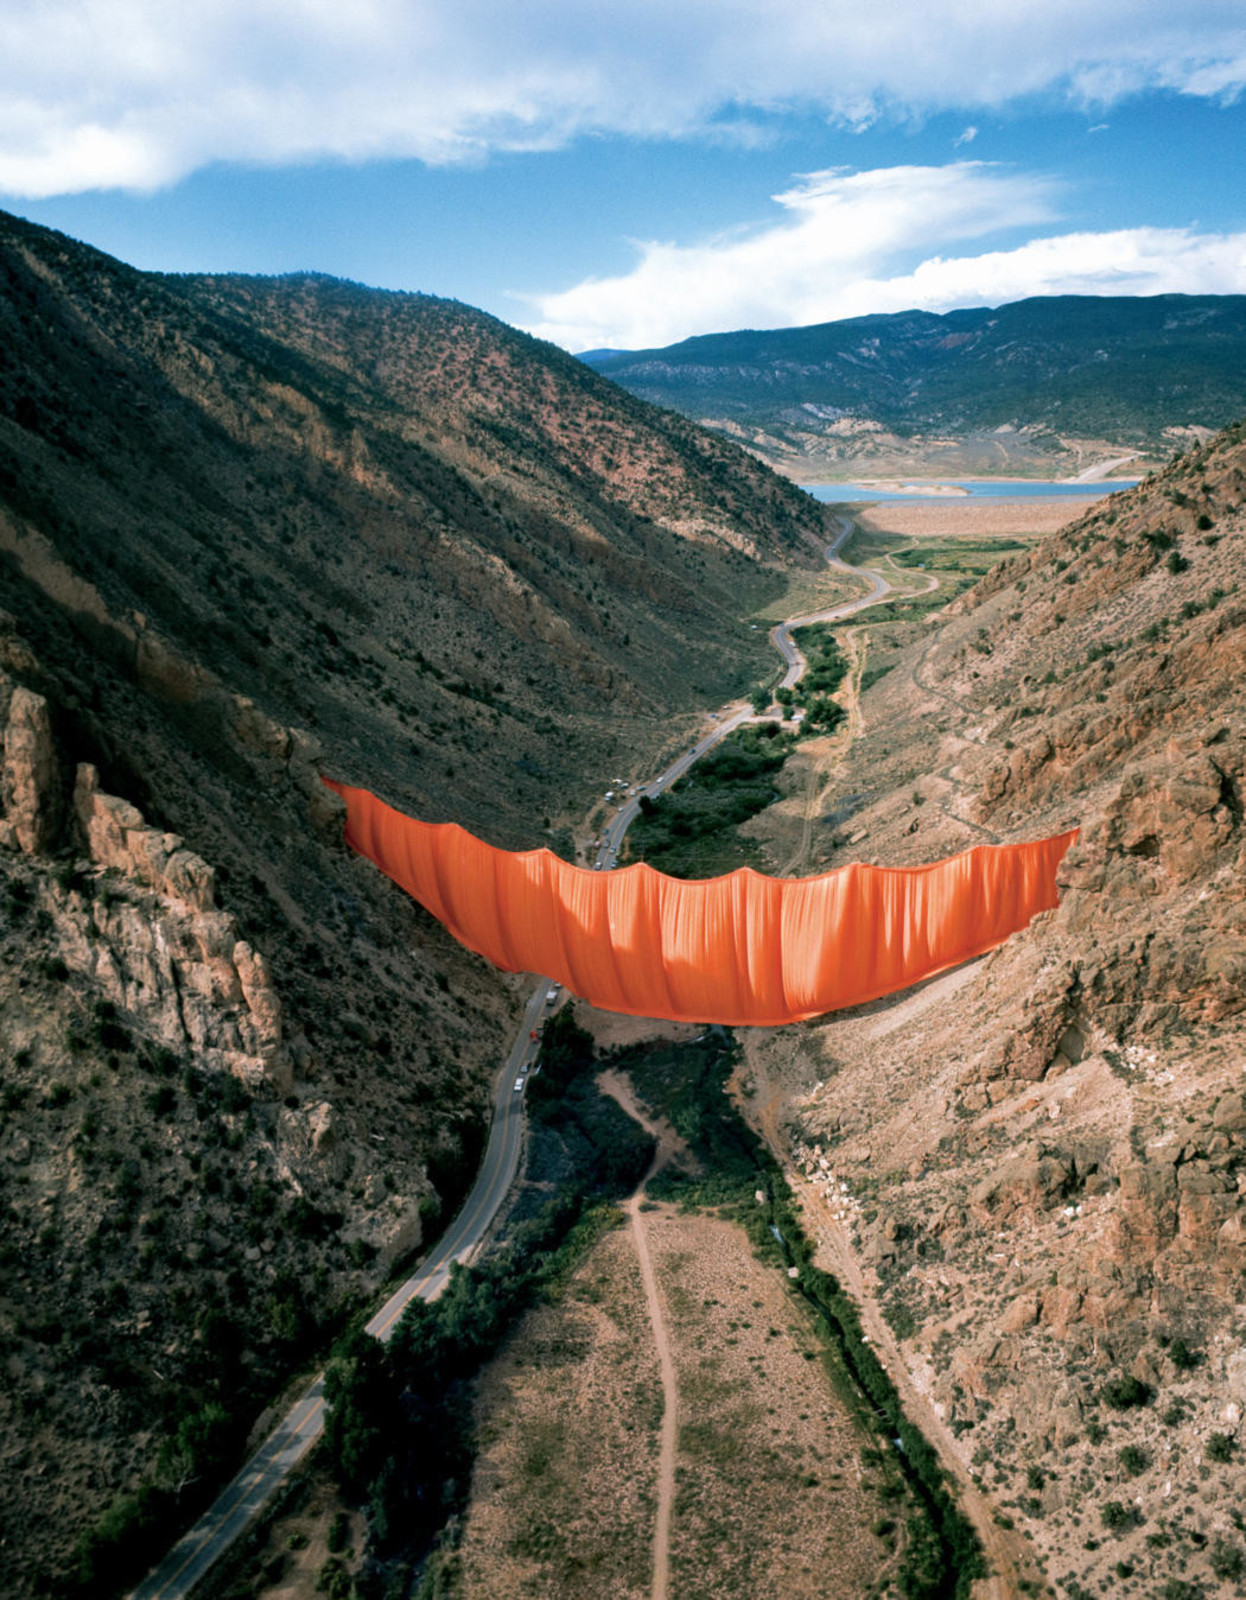 Christo and Jeanne-Claude. Valley Curtain. 1970-72. Rifle, Colorado